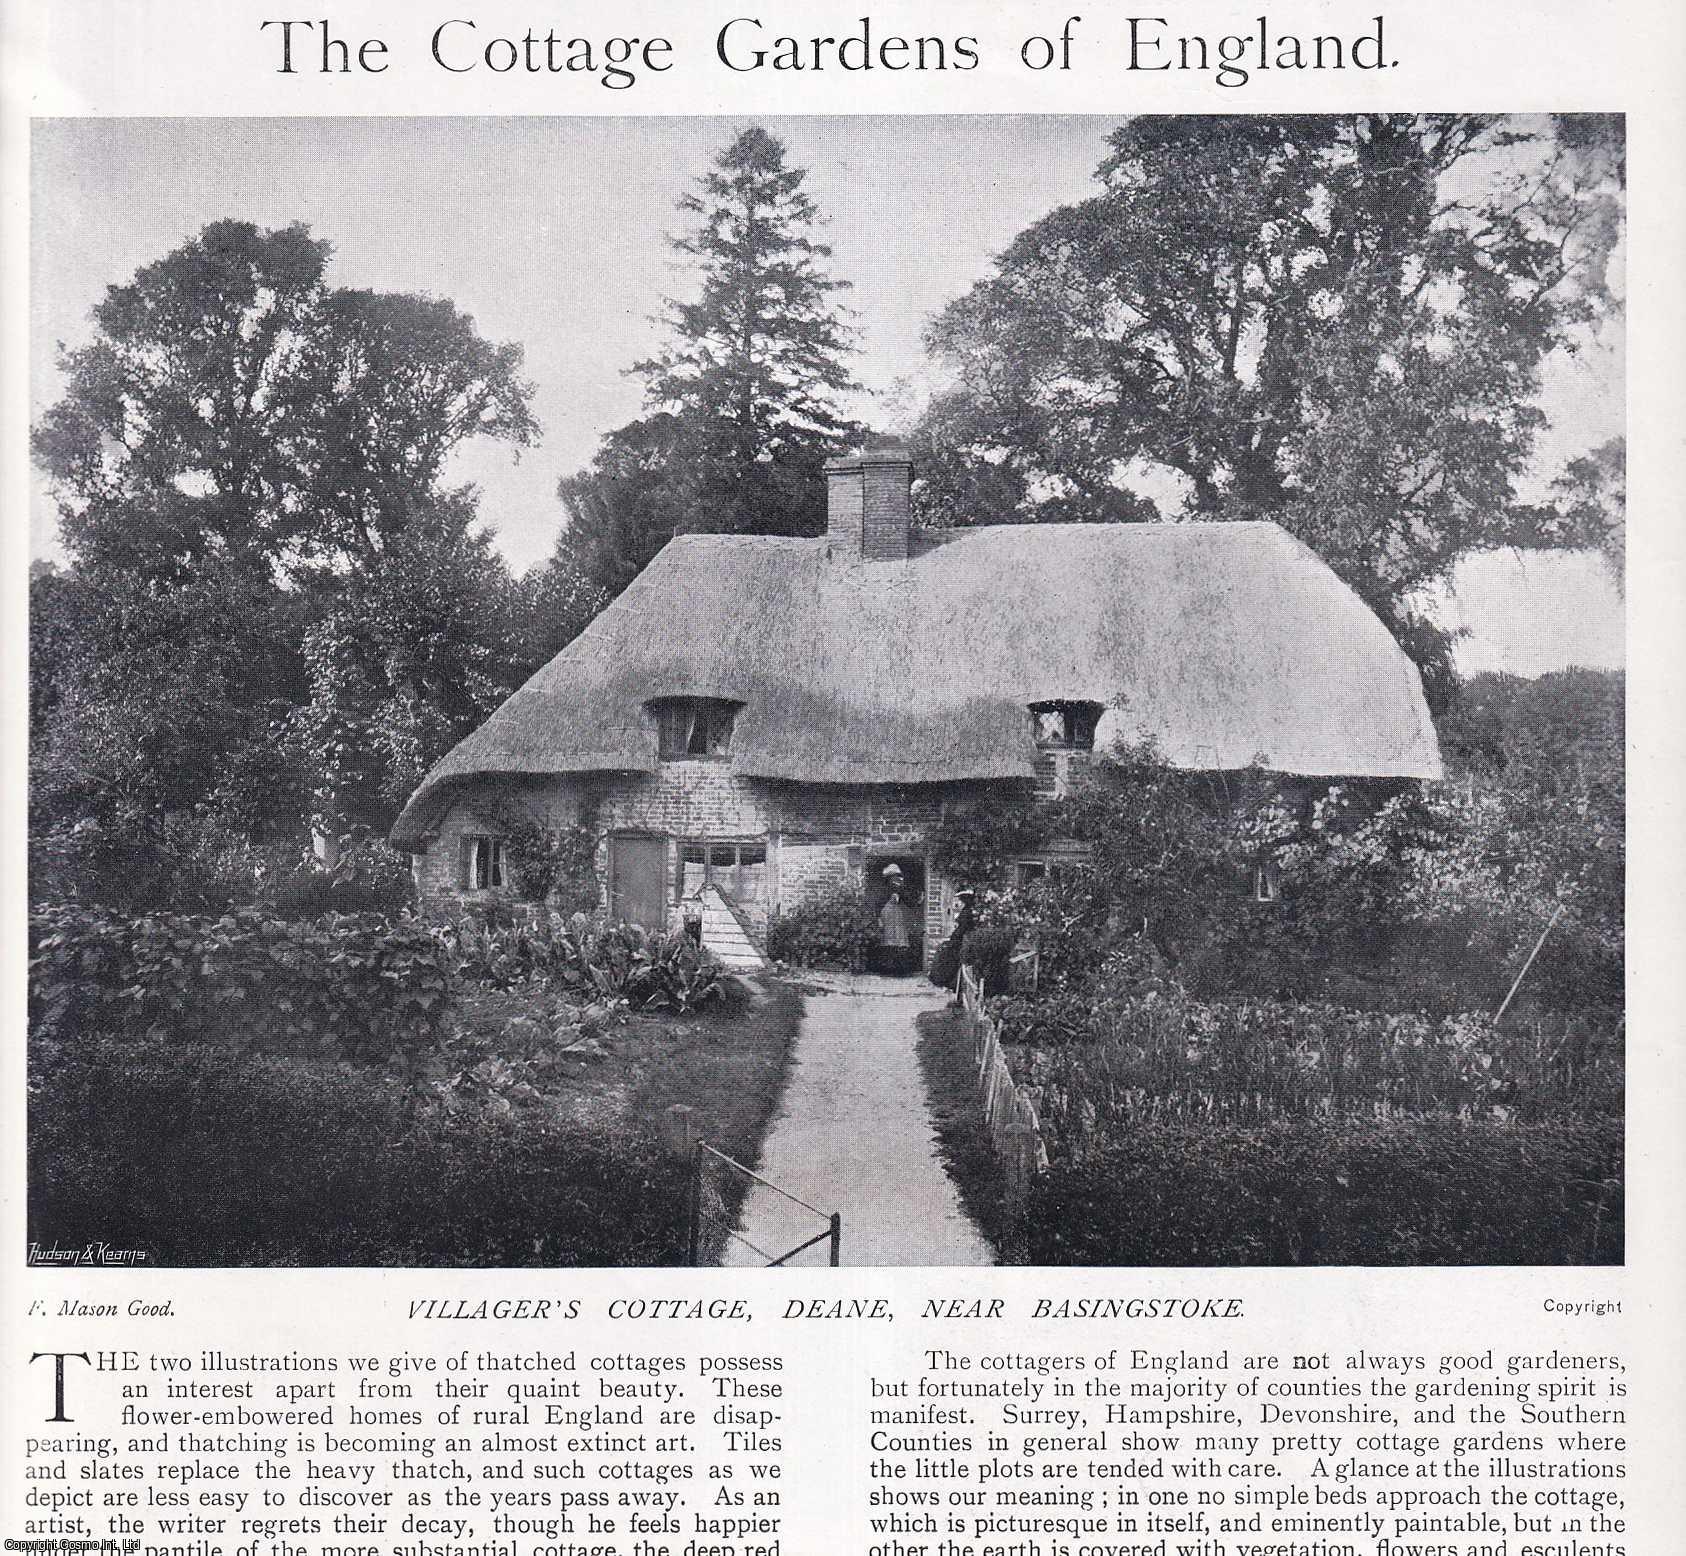 COUNTRY LIFE - The Cottage Gardens of England. Several pictures and accompanying text, removed from an original issue of Country Life Magazine, 1898.